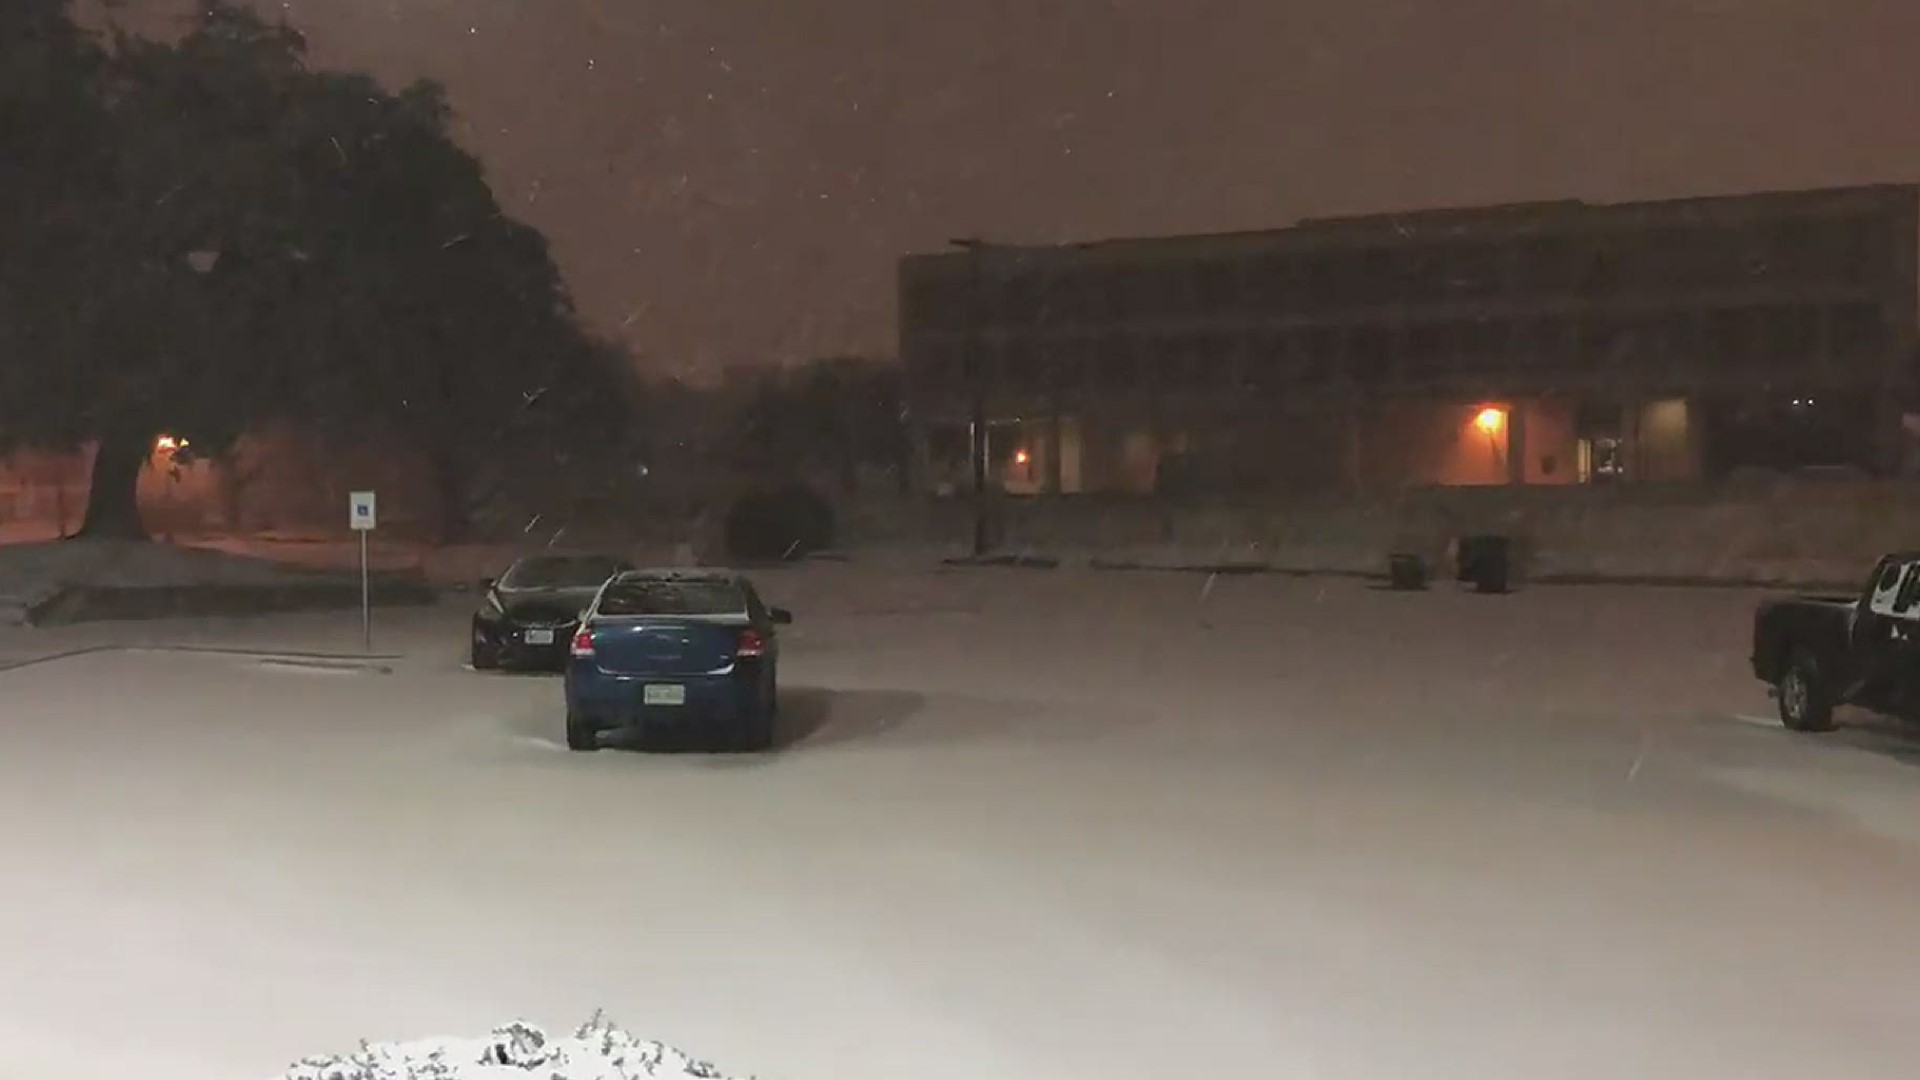 Video of snowfall in Temple, Texas overnight Sunday into Monday. The area recorded about 3 inches of snow around 1:30 a.m.
Credit: Chelsea Durcholz